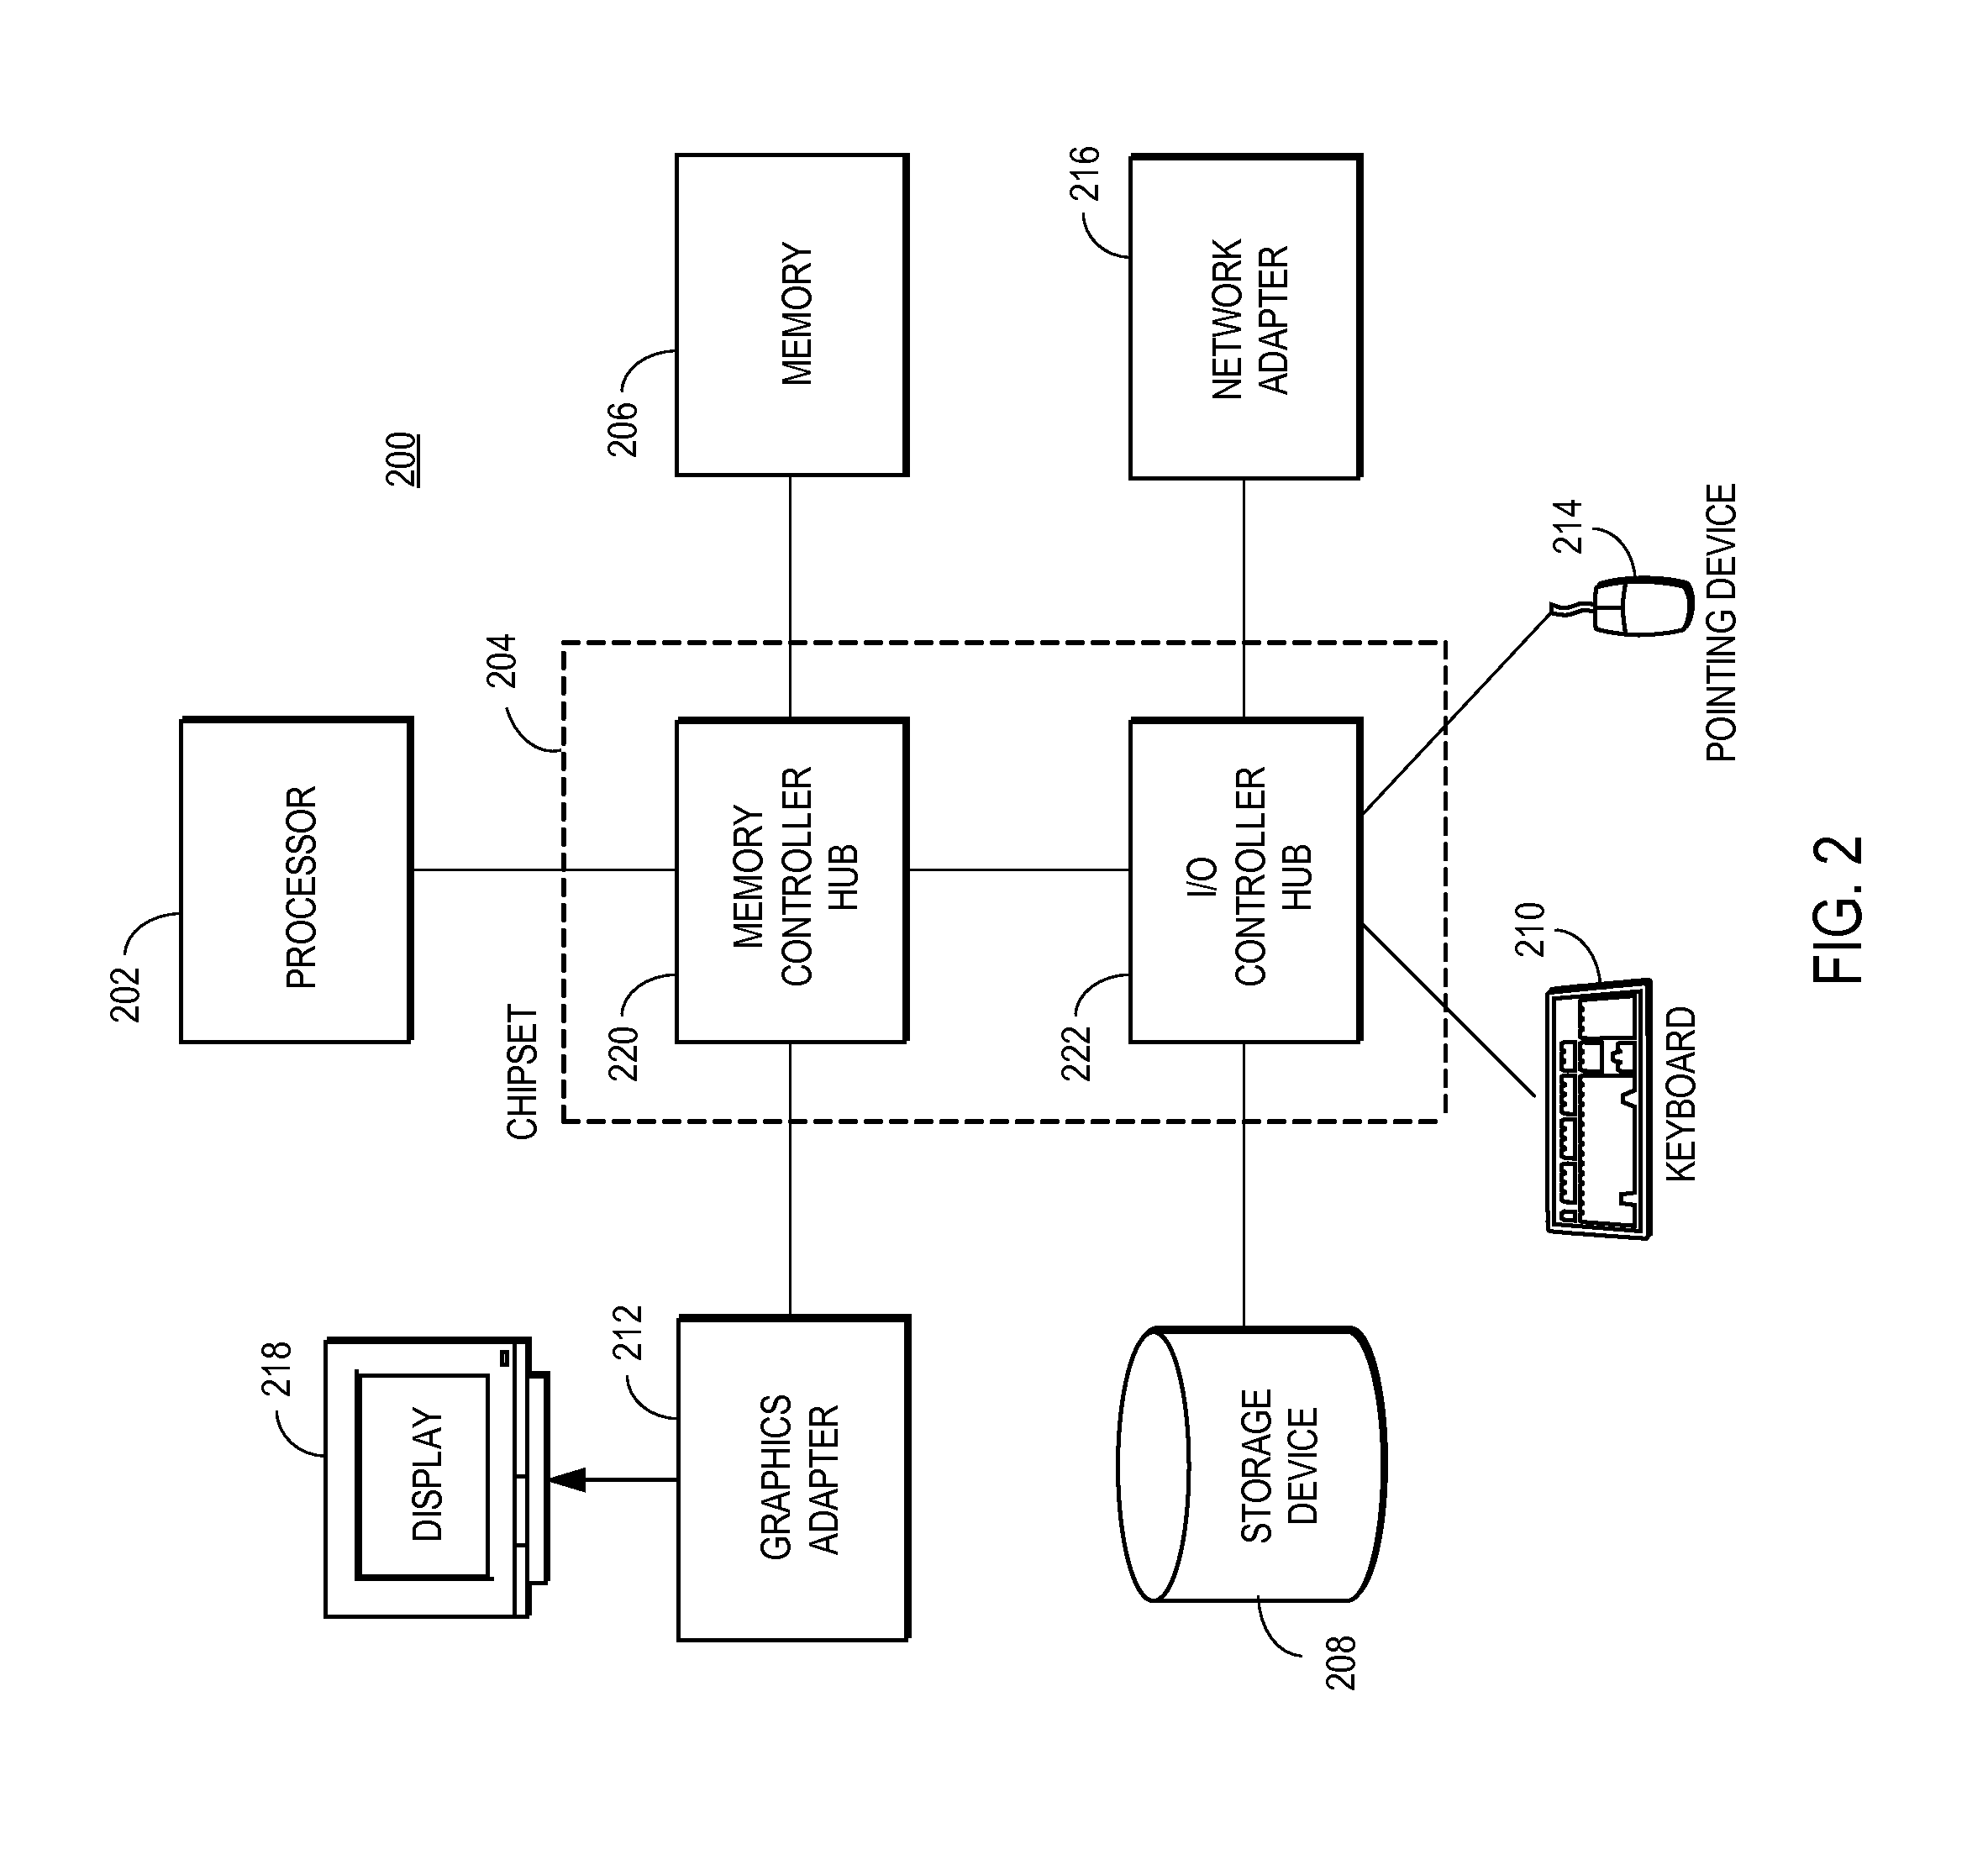 Server-based architecture for securely providing multi-domain applications